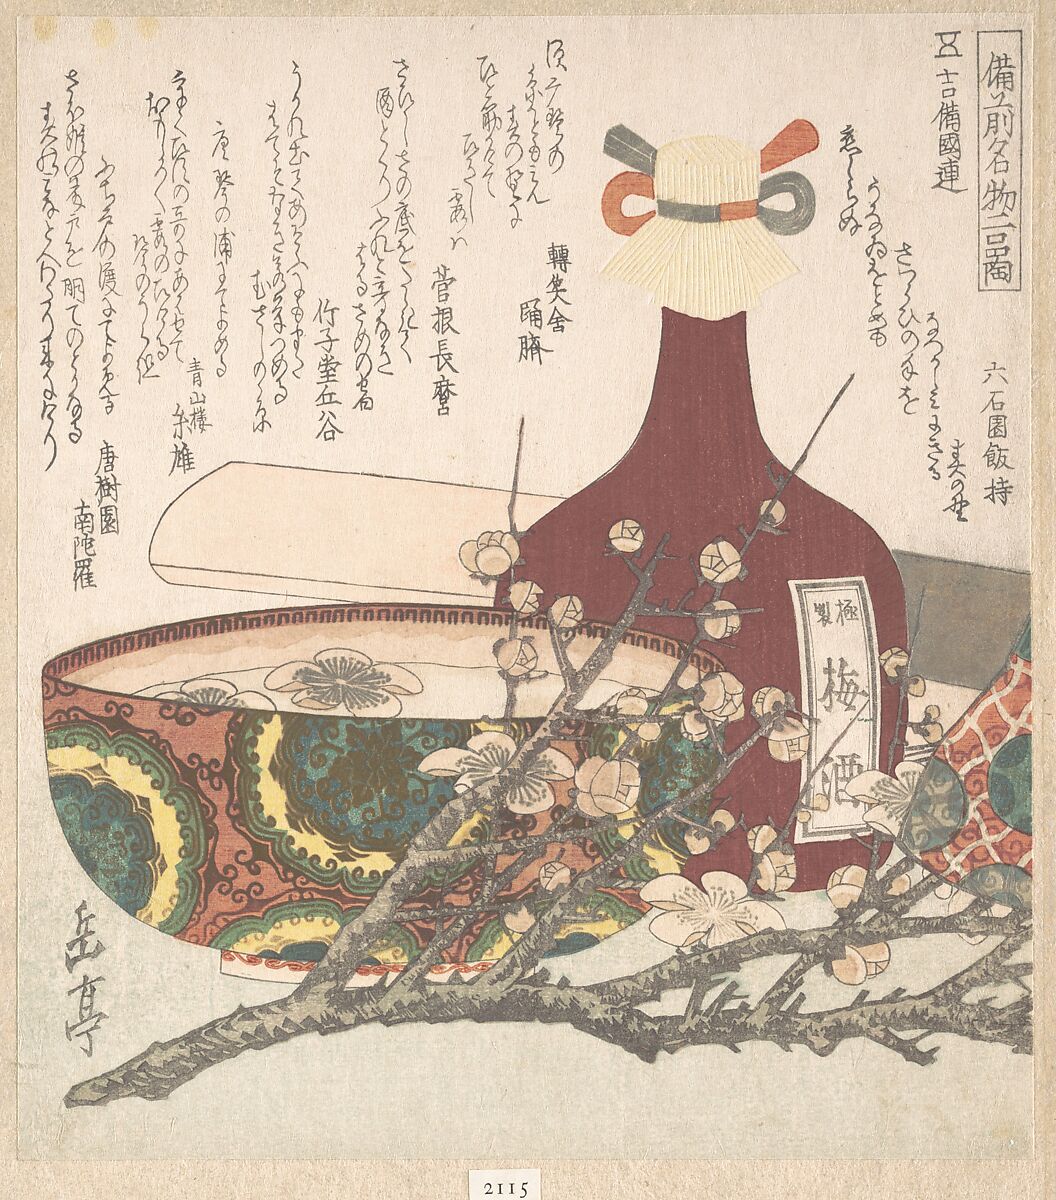 Specialities of Bizen Province, Yashima Gakutei (Japanese, 1786?–1868), Woodblock print (surimono); ink and color on paper, Japan 